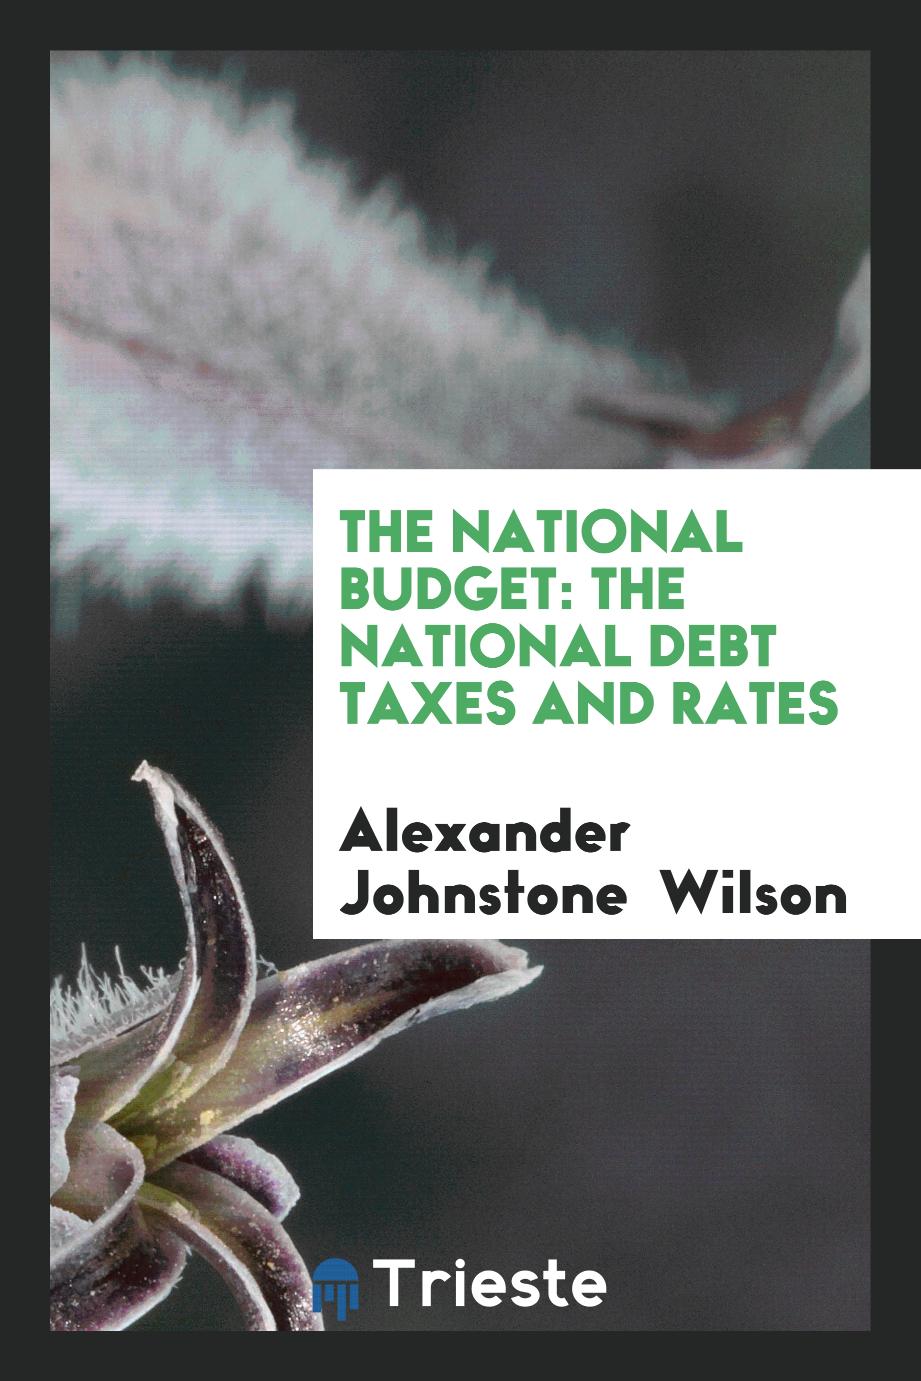 The National Budget: The National Debt Taxes and Rates